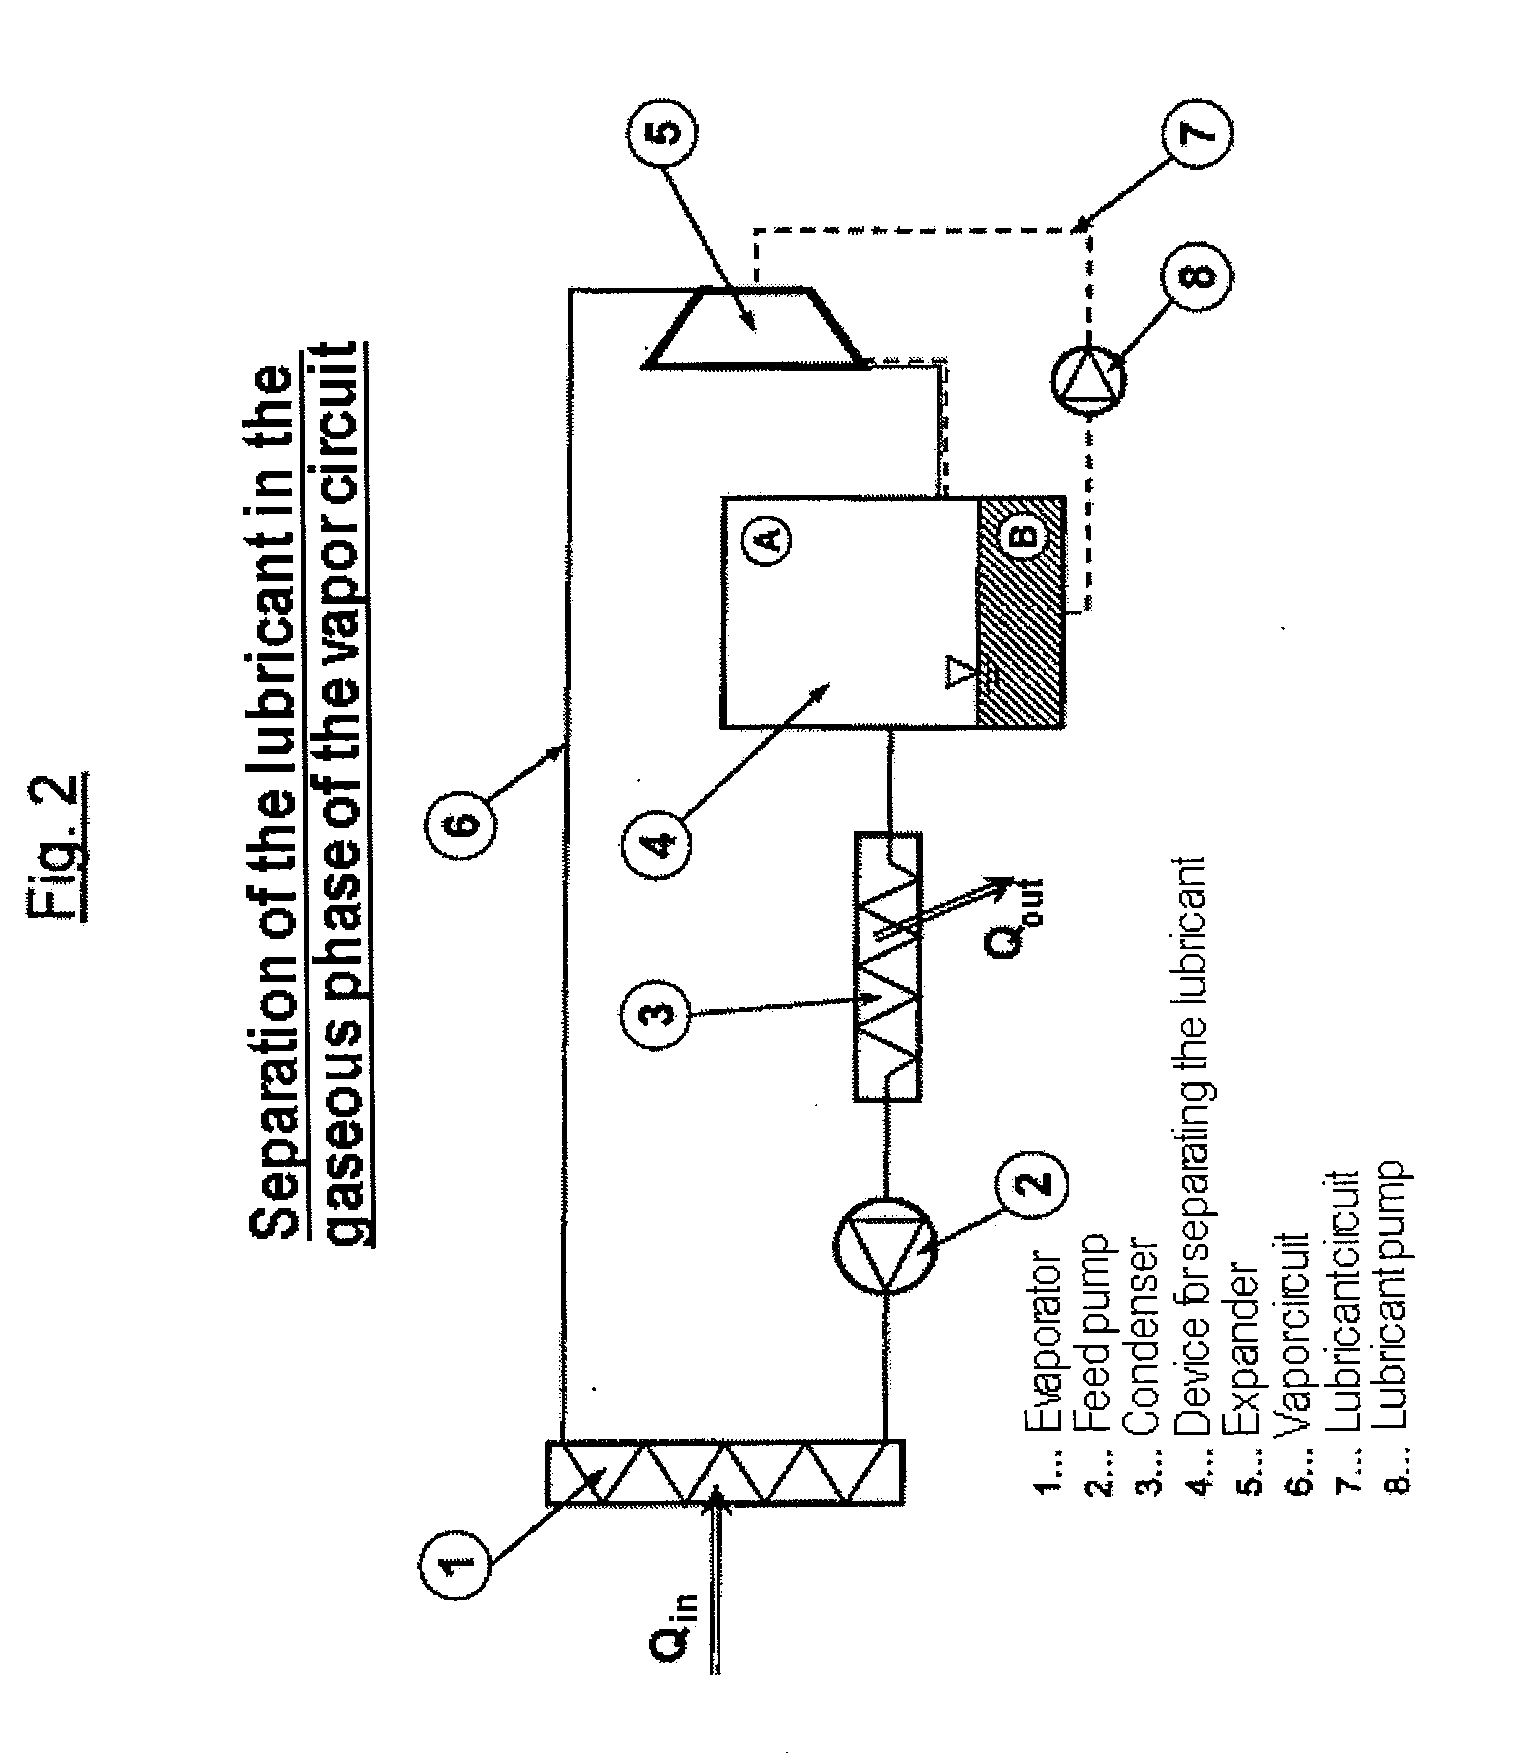 Method and Apparatus for Operating a Steam Cycle Process with a Lubricated Expander